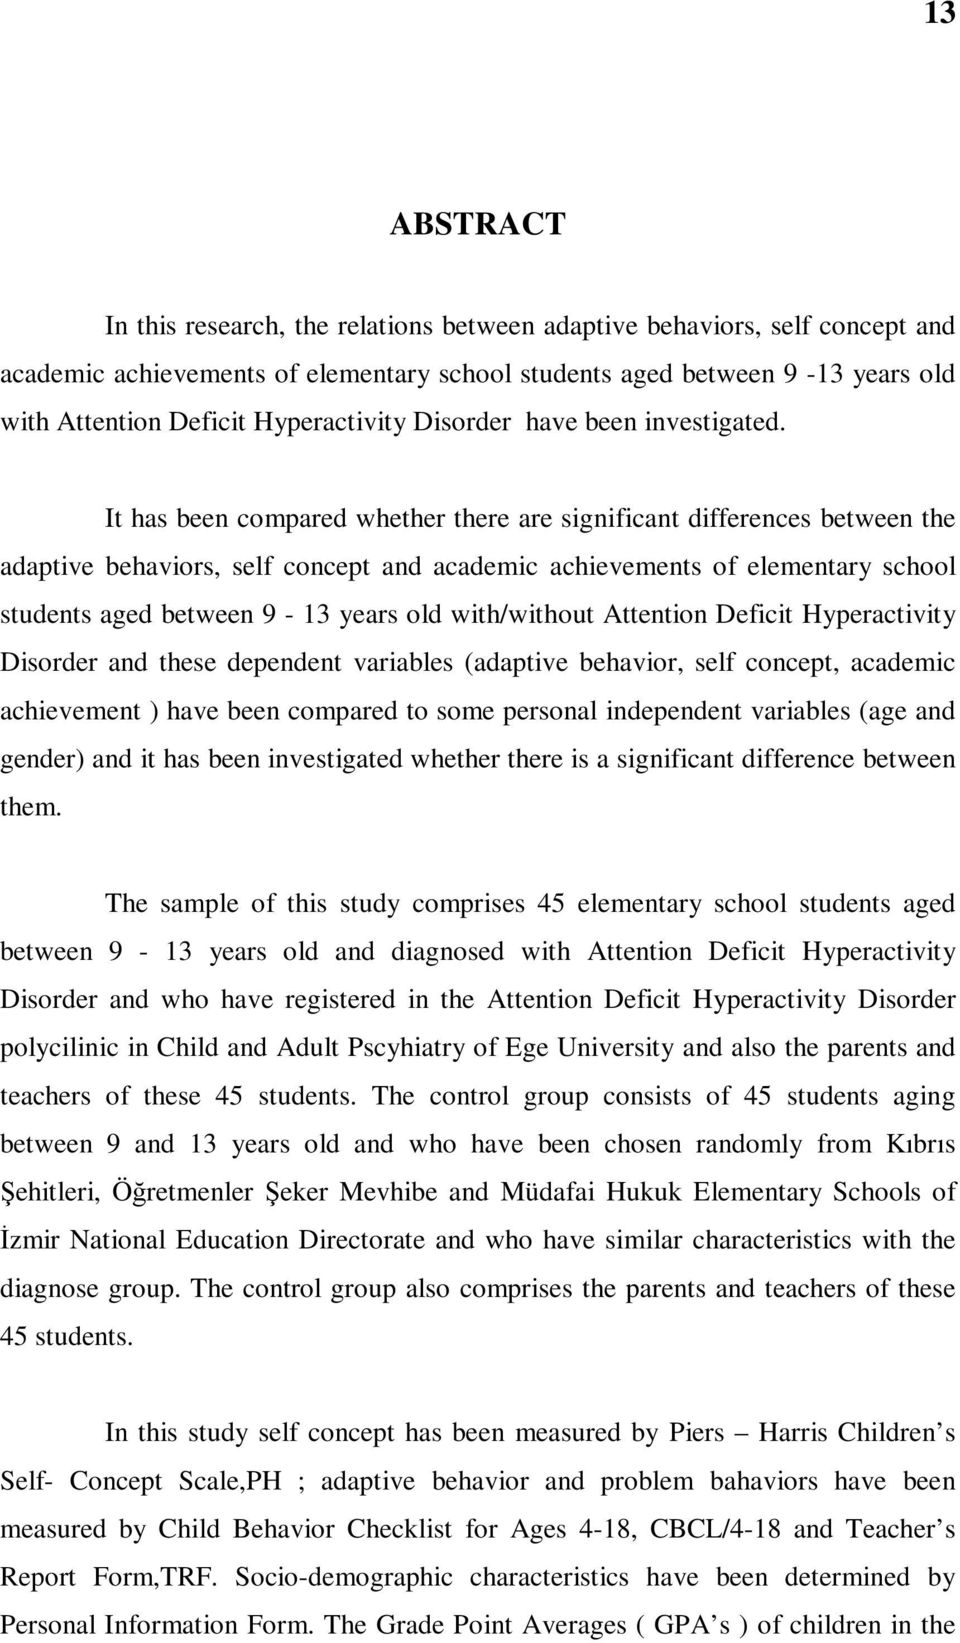 It has been compared whether there are significant differences between the adaptive behaviors, self concept and academic achievements of elementary school students aged between 9-13 years old